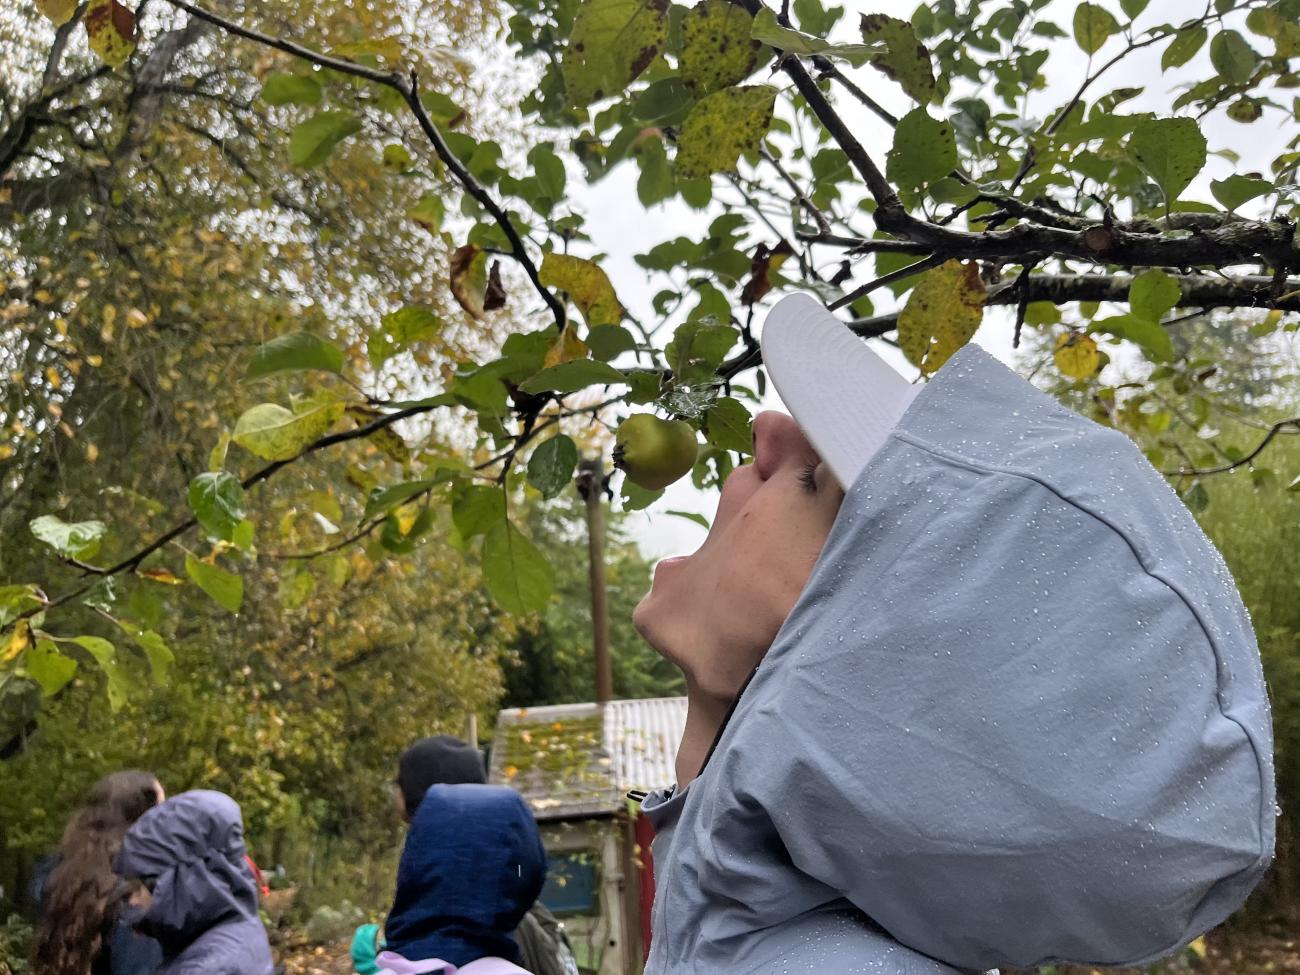 person with a hat and hood on about to eat an apple off of a tree